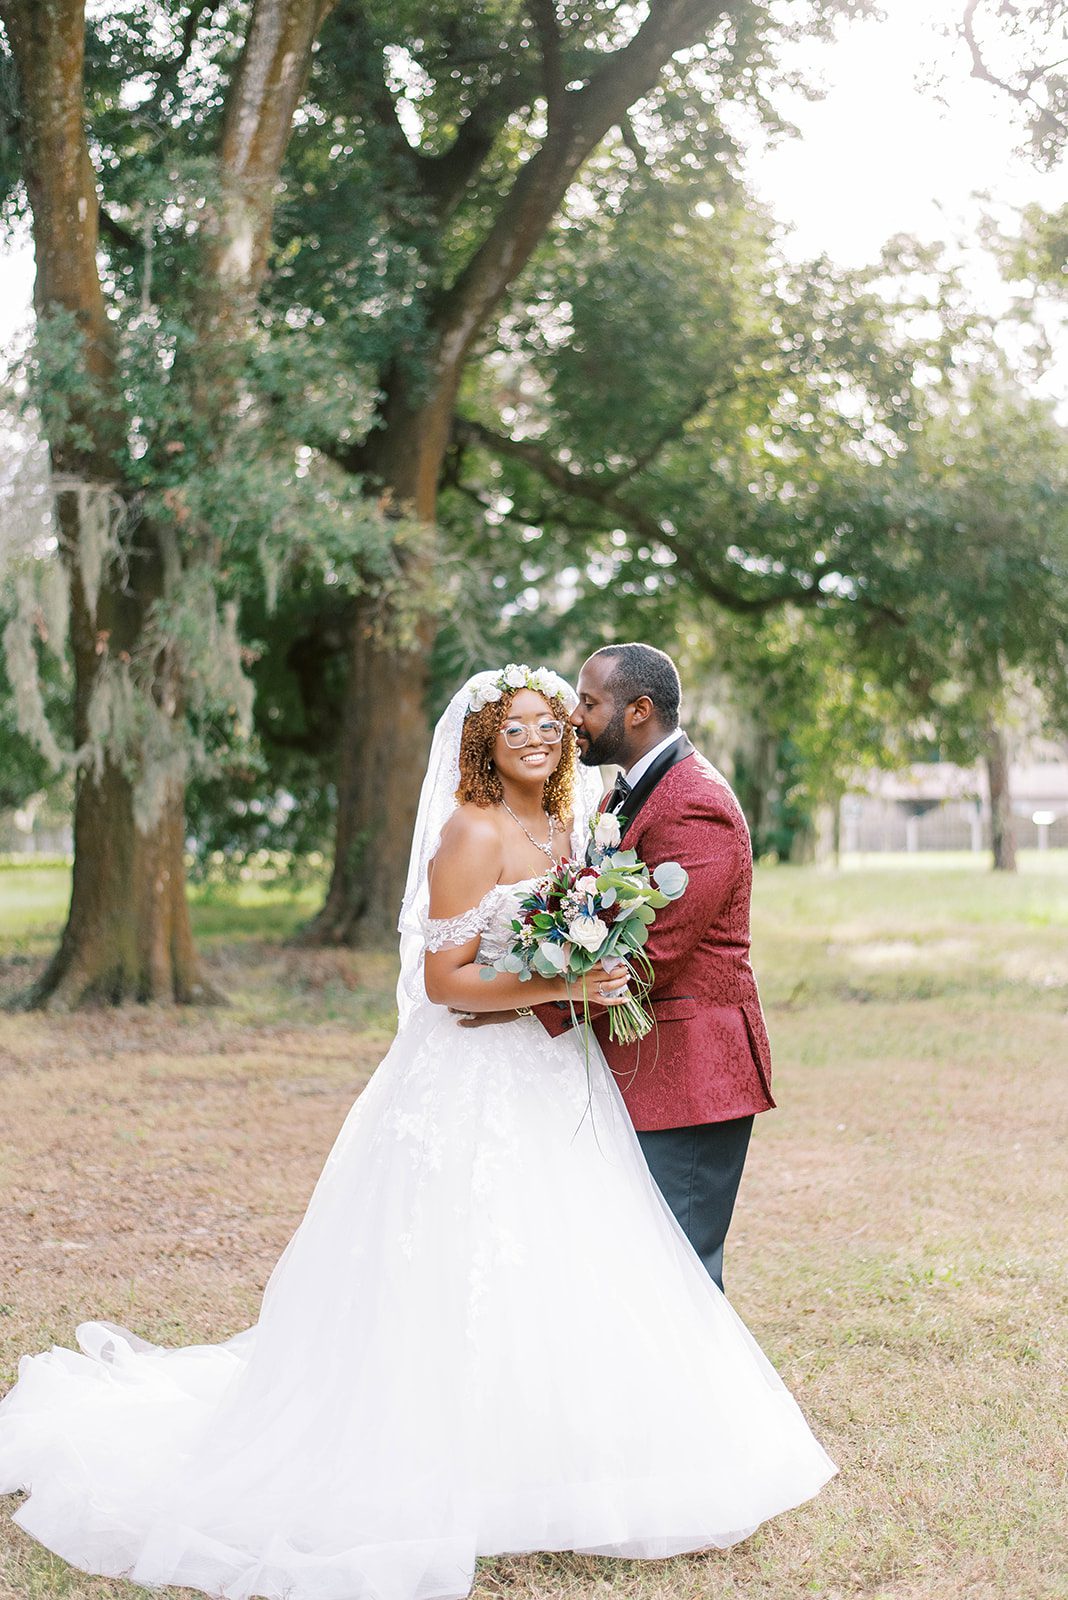 bride in a large fluffy white gown with a stunning red and white bridal bouquet is held by her groom who is wearing a red suit coat as they stand outside of their wedding venue